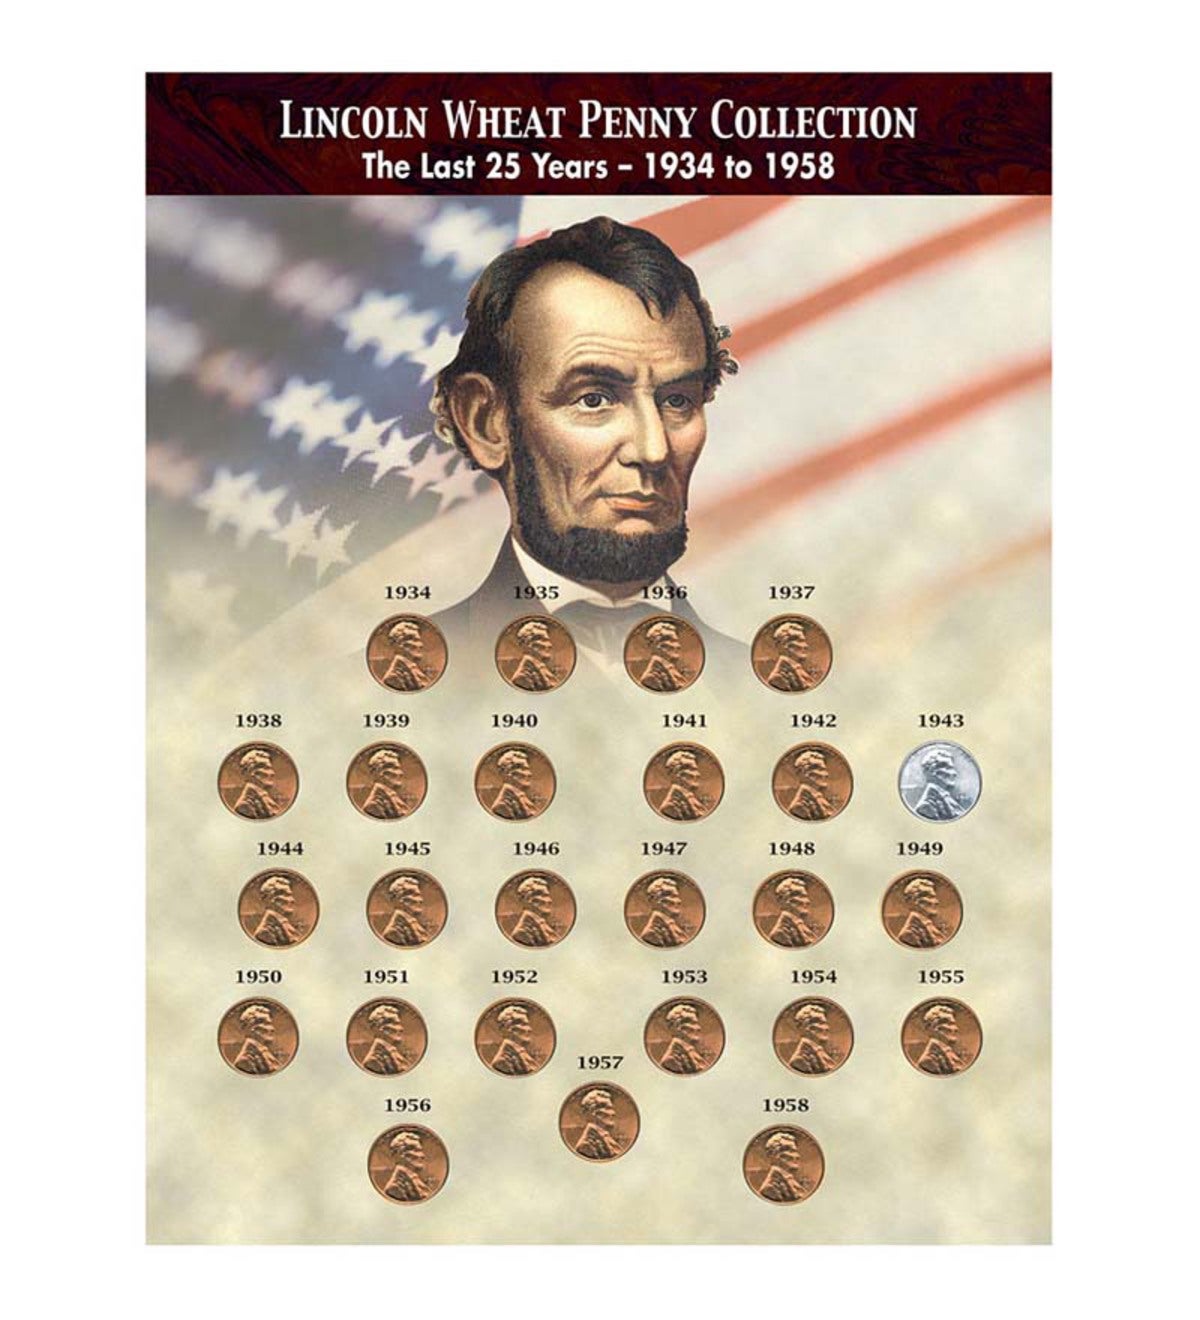 Lincoln Wheat Penny Coin Collection